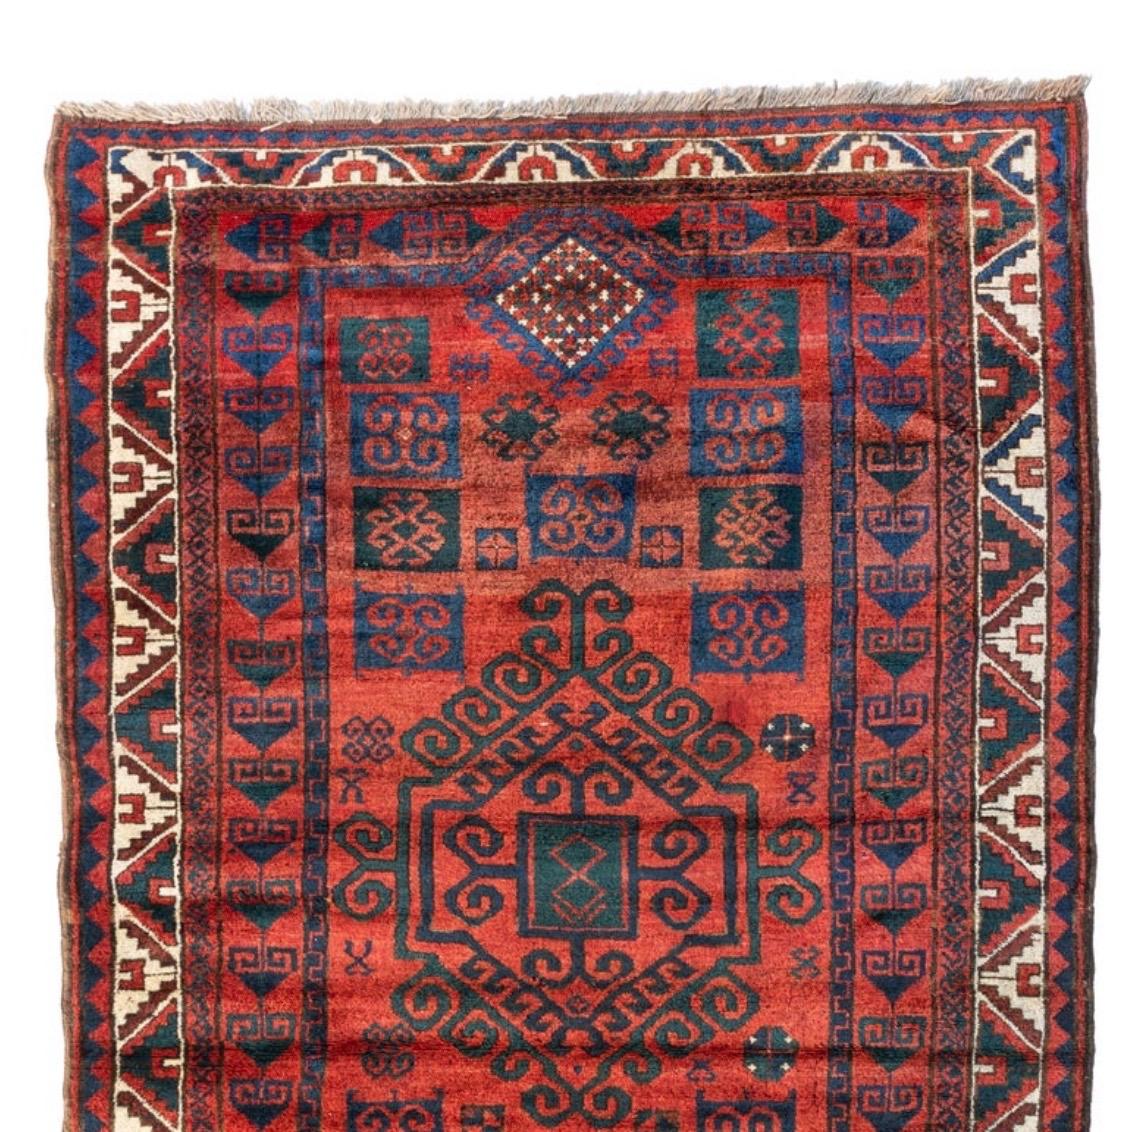 Afghan Antique Red Geometric Tribal Afcan Area Rug, c. 1930s For Sale